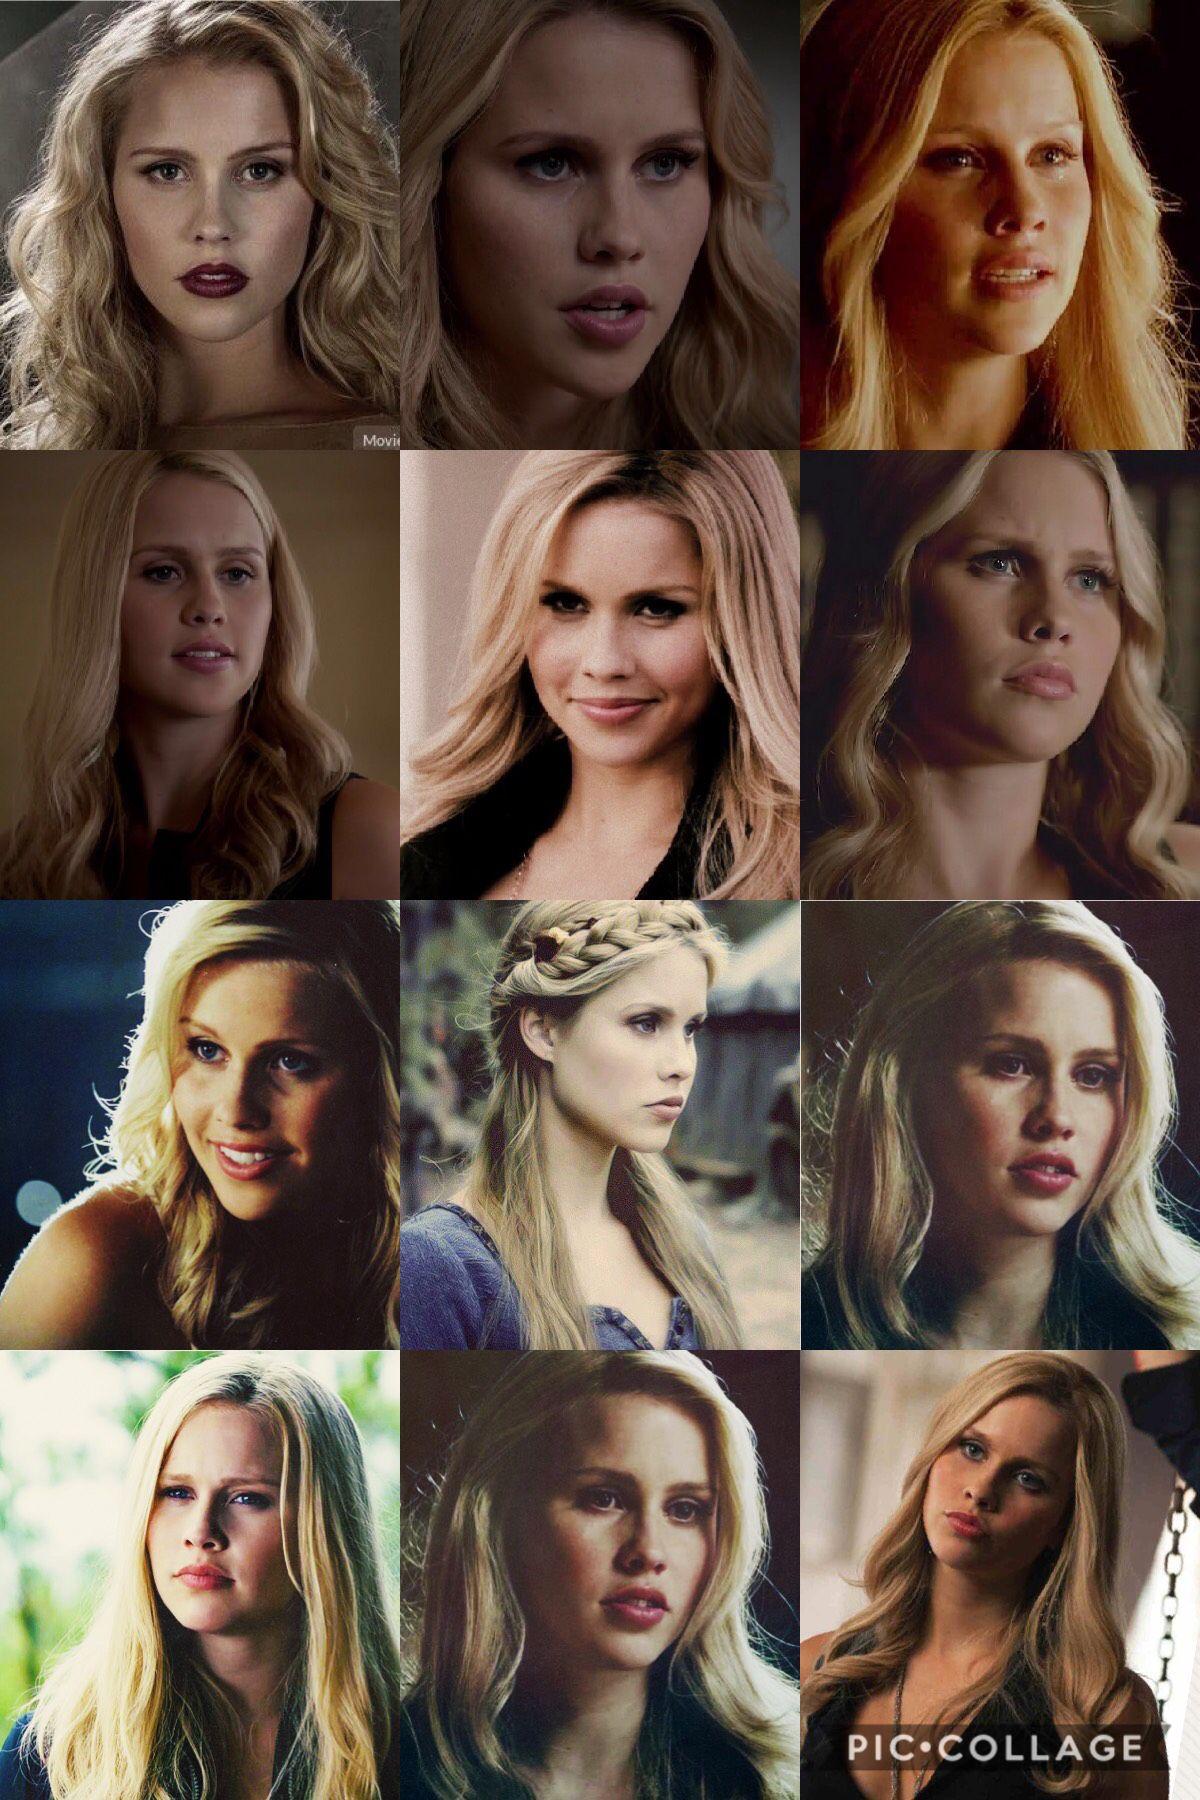 Rebekah Mikaelson. TVD TO In 2019